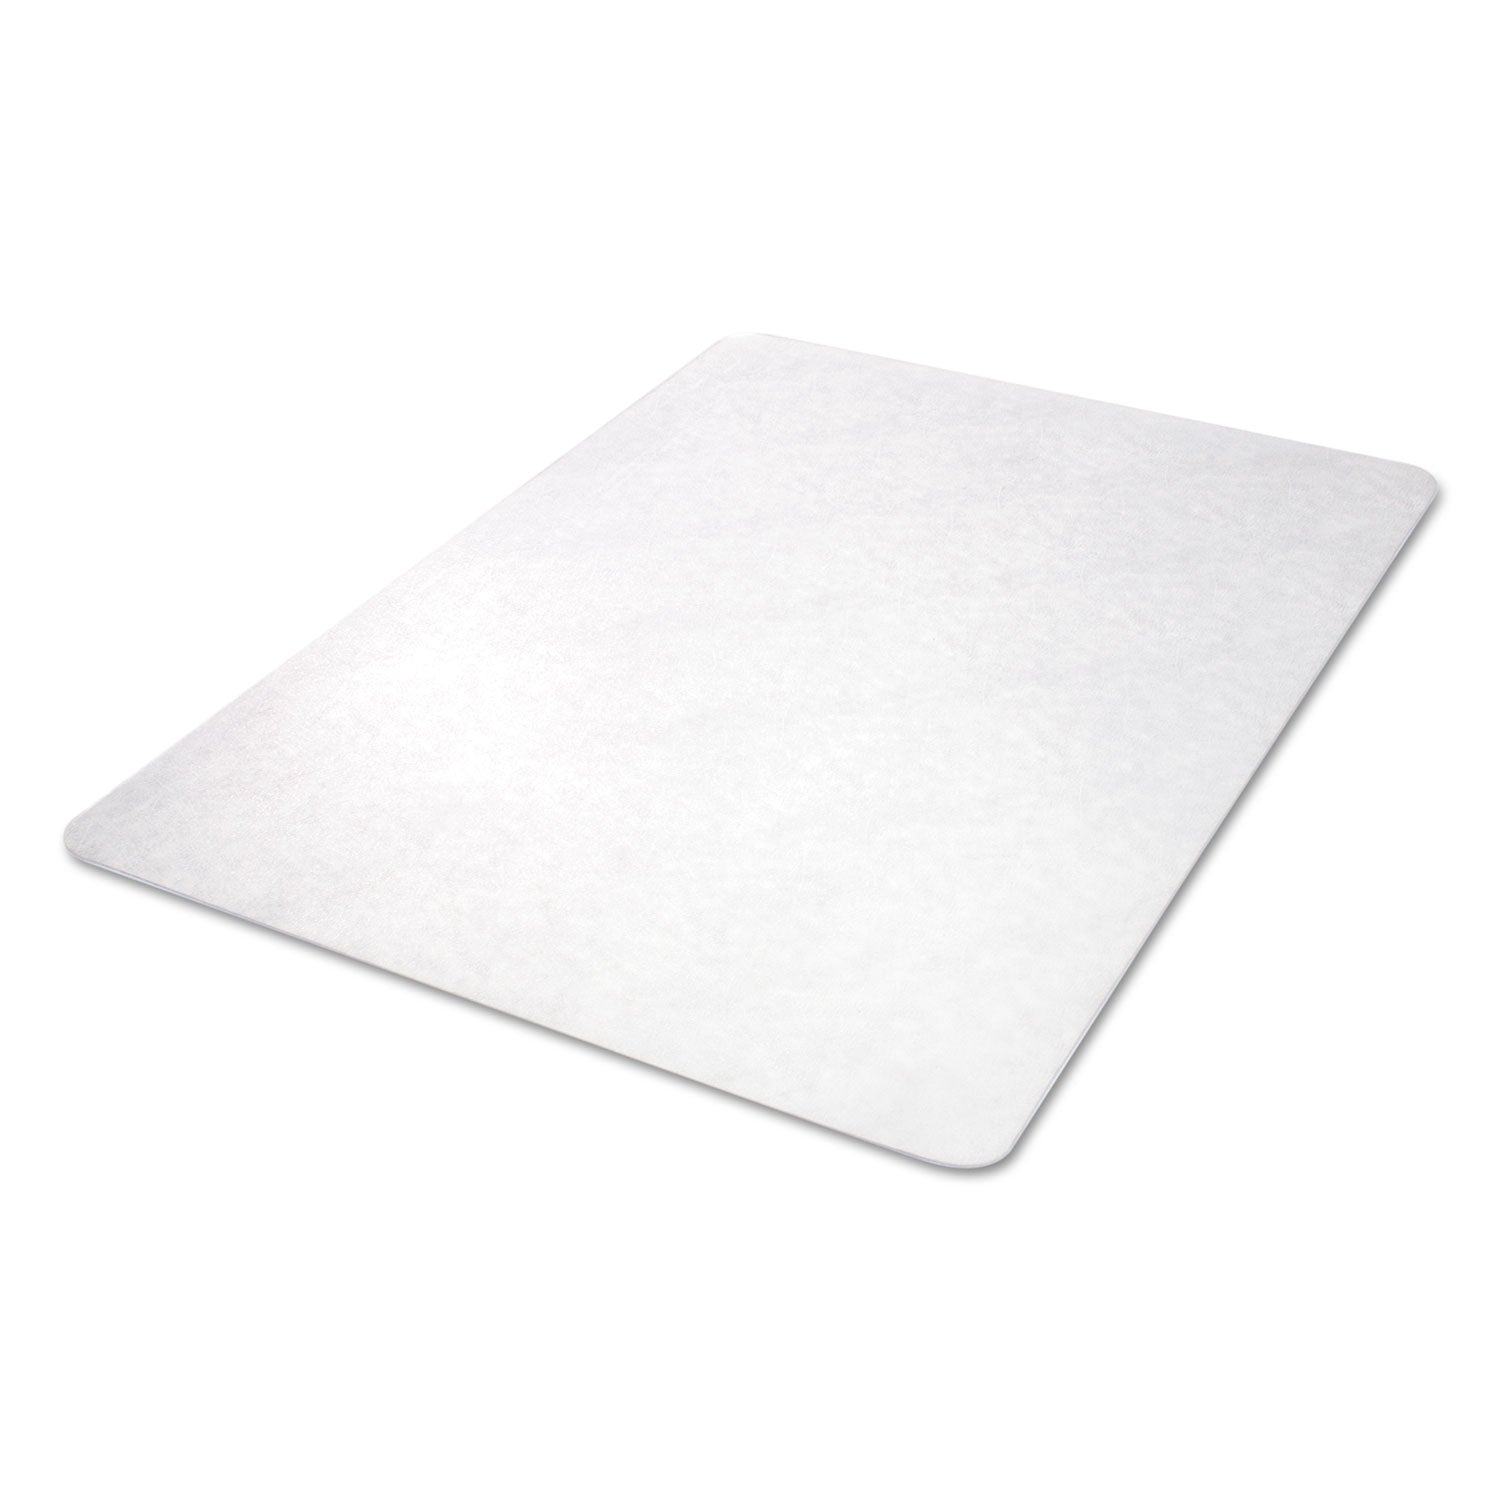 economat-all-day-use-chair-mat-for-hard-floors-rolled-packed-45-x-53-clear_defcm21242com - 7